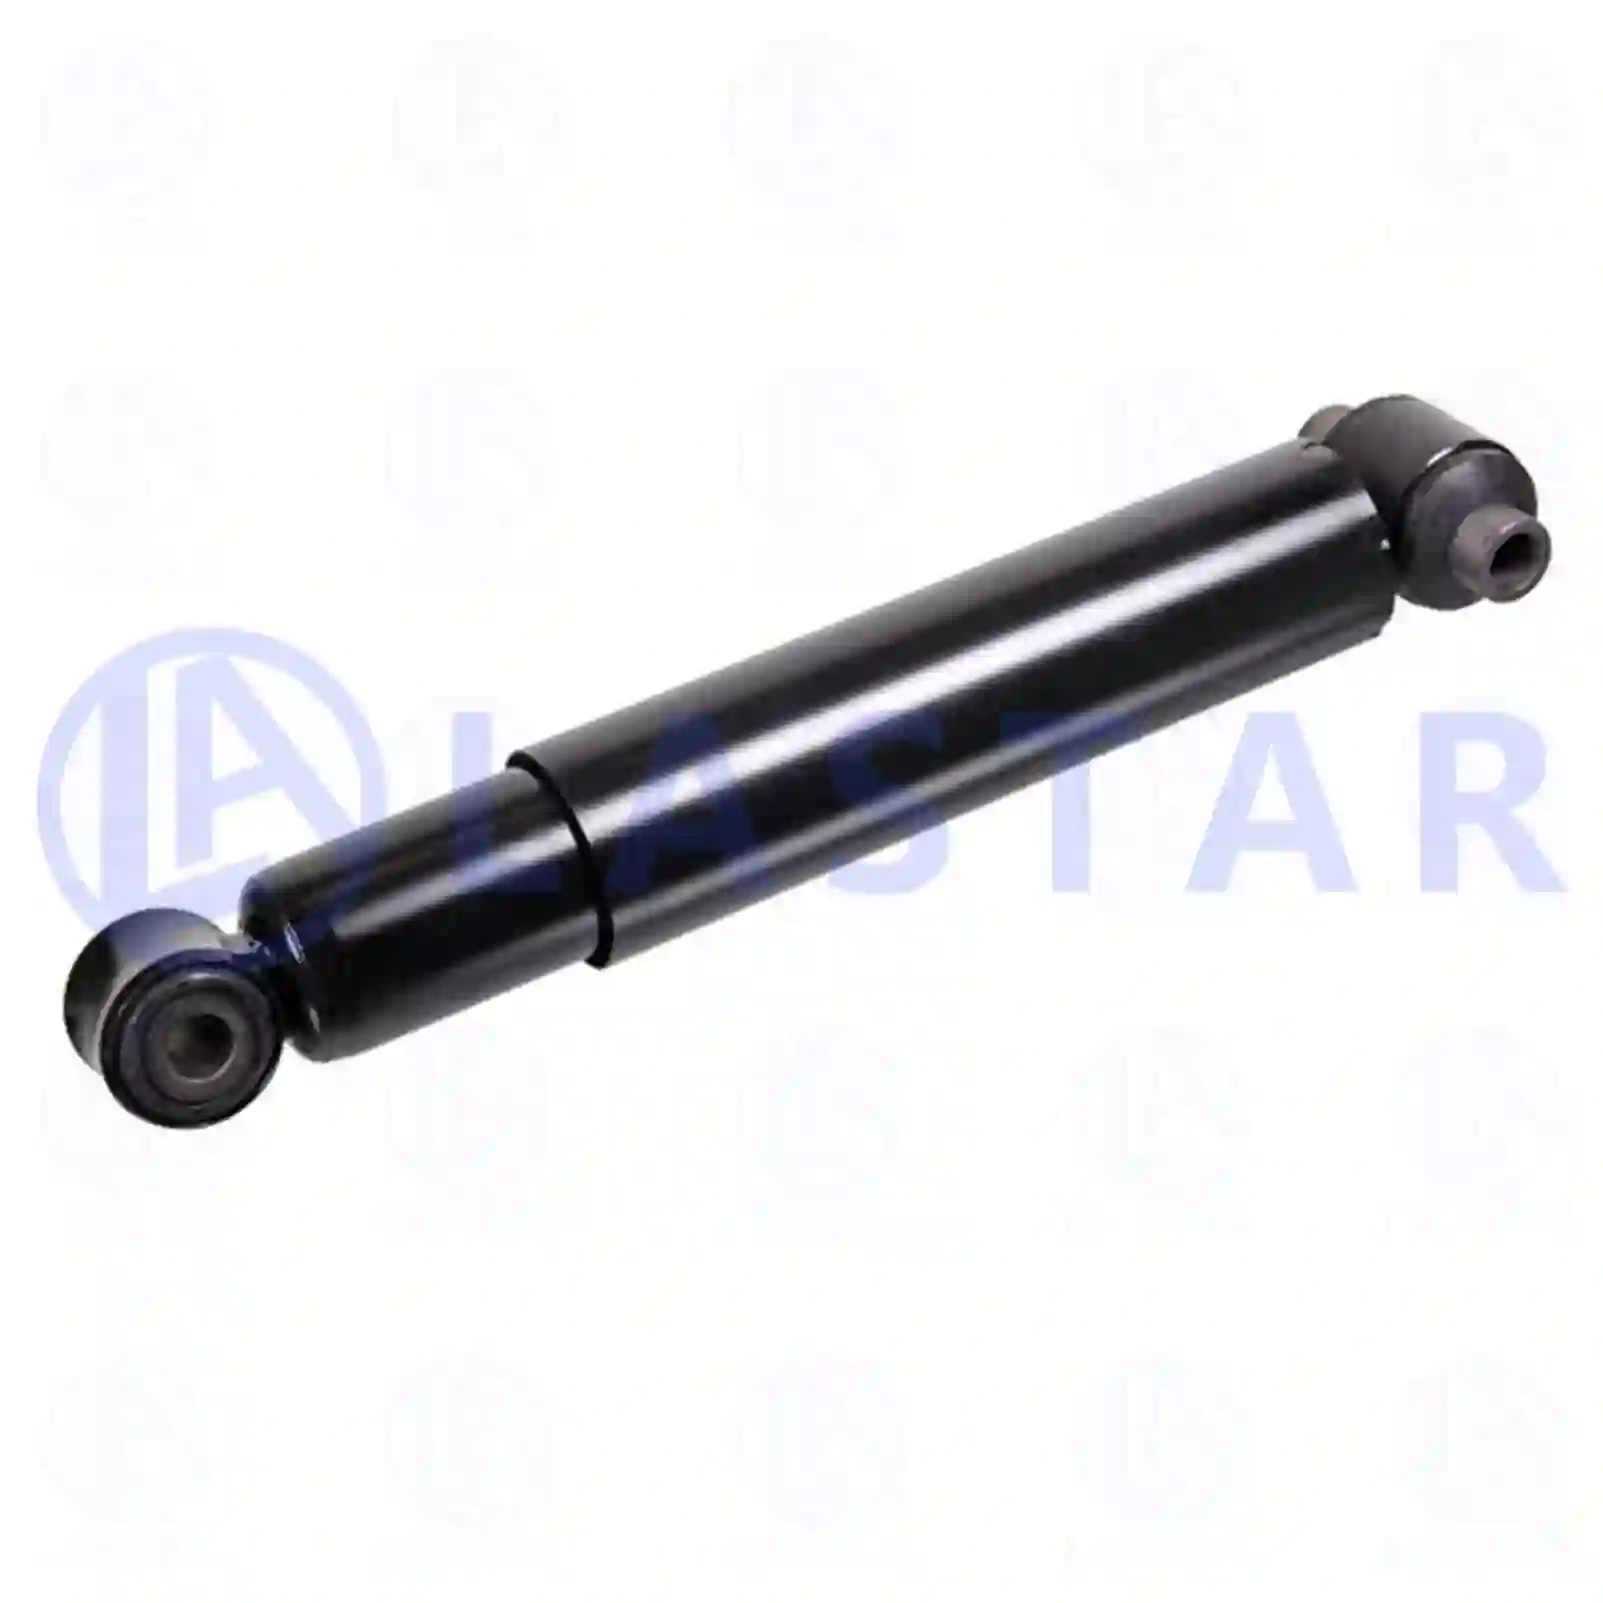 Shock absorber, 77727853, 0053261100, 0053262500, 0063263100, 0063266000, ZG41603-0008, ||  77727853 Lastar Spare Part | Truck Spare Parts, Auotomotive Spare Parts Shock absorber, 77727853, 0053261100, 0053262500, 0063263100, 0063266000, ZG41603-0008, ||  77727853 Lastar Spare Part | Truck Spare Parts, Auotomotive Spare Parts